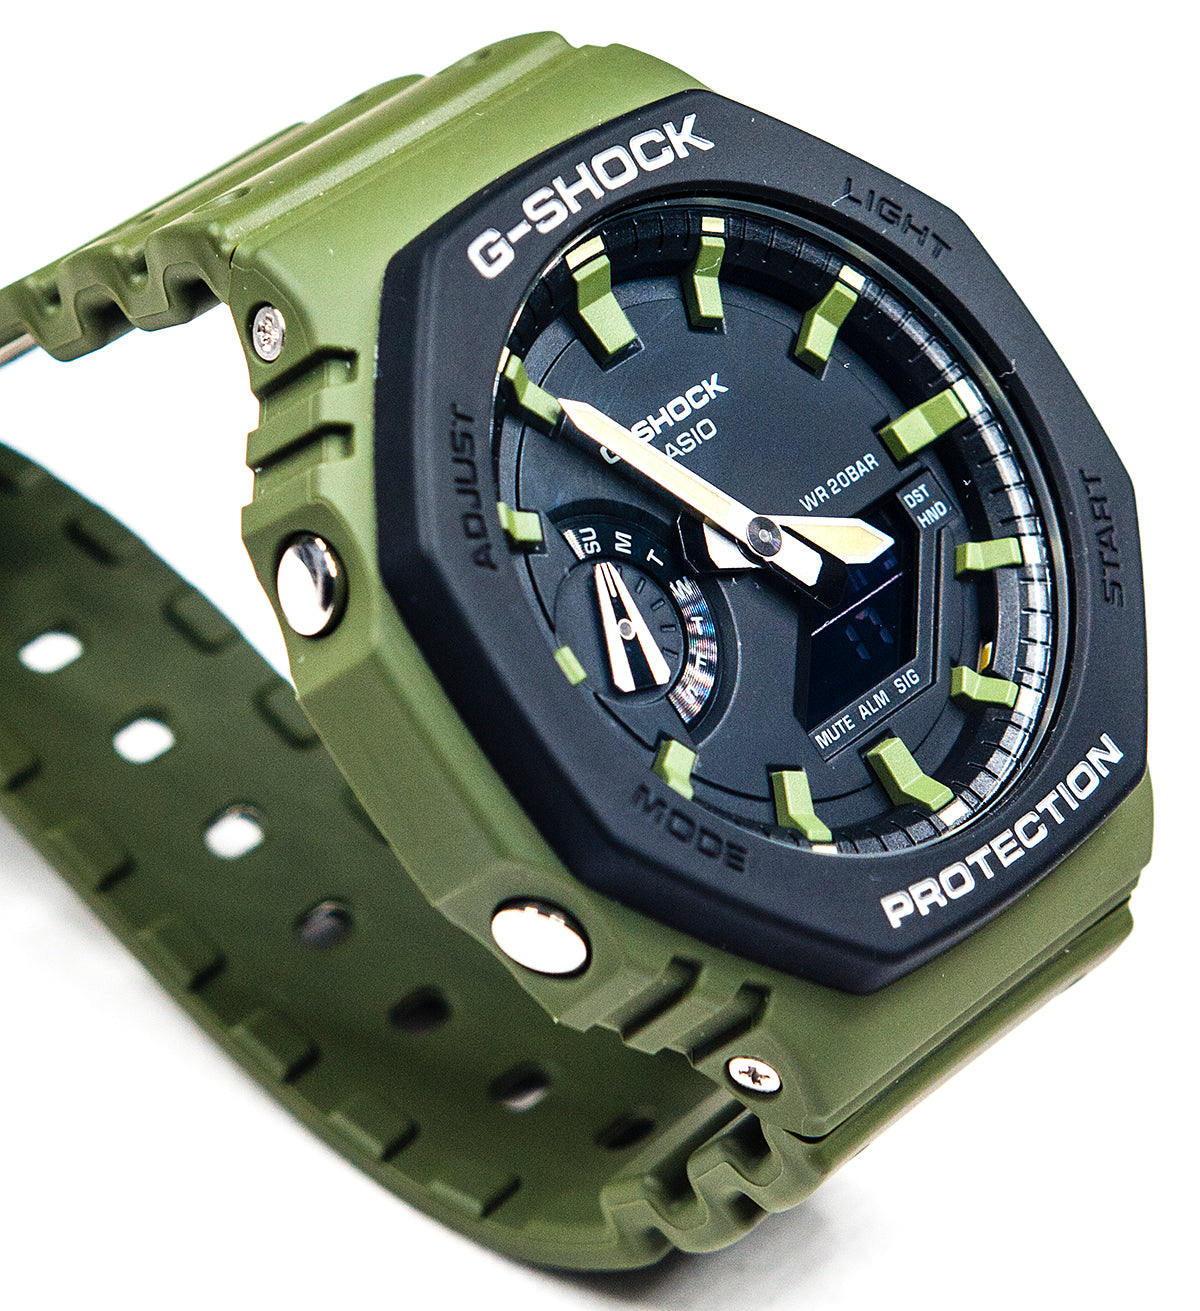 Does Casioak Live up to the Hype? Casio G-Shock Watch Review